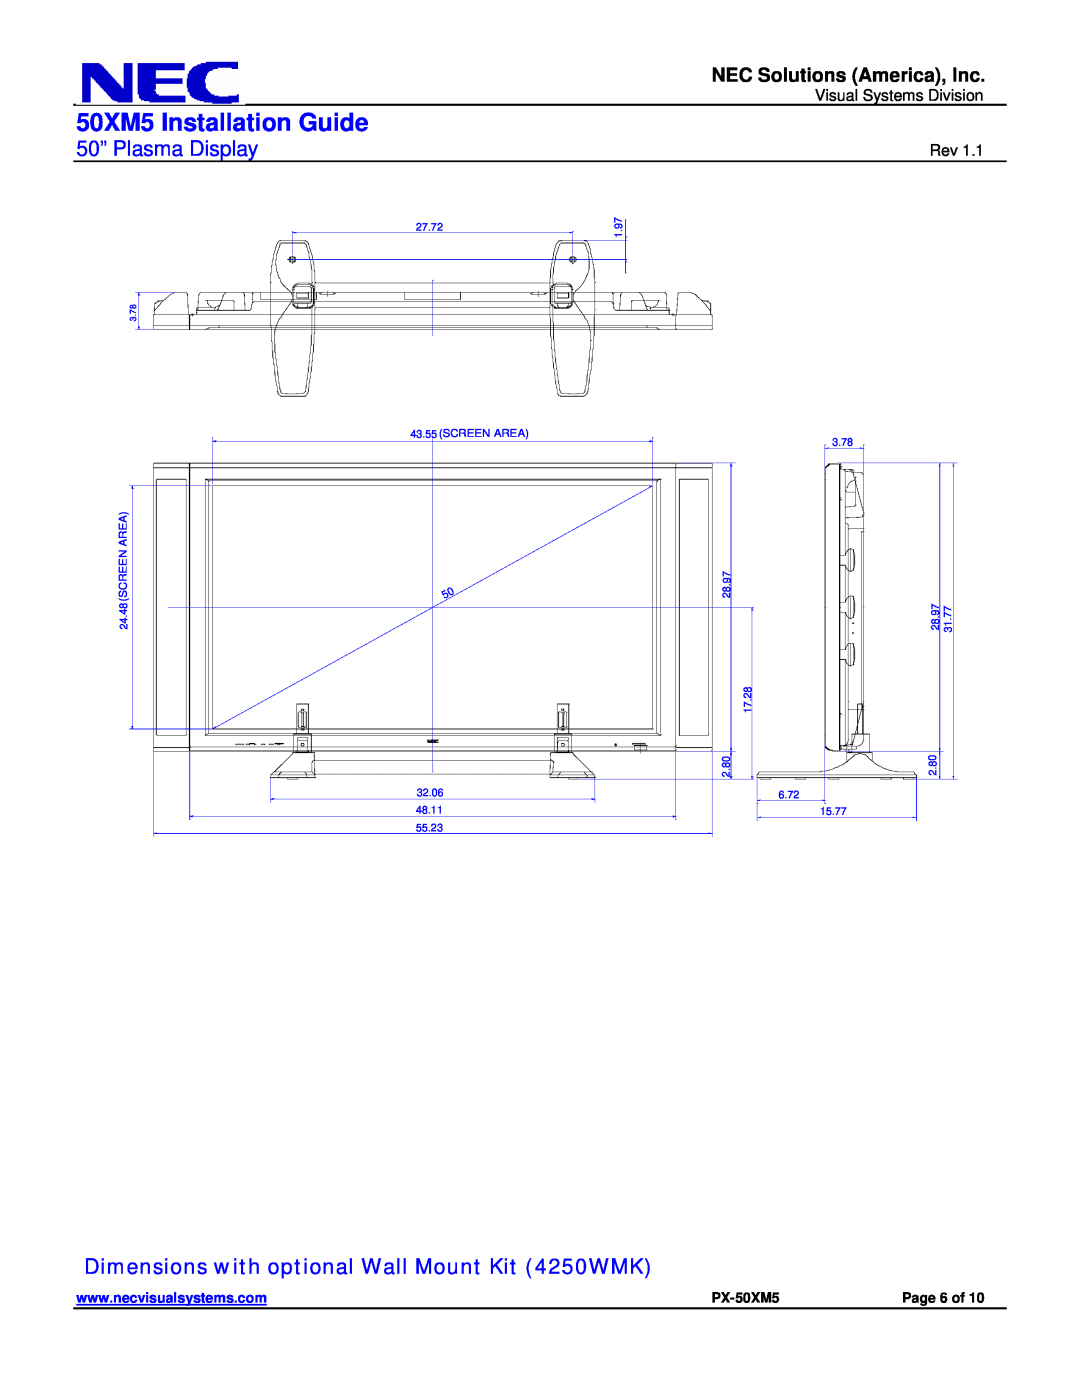 NEC Dimensions with optional Wall Mount Kit 4250WMK, 50XM5 Installation Guide, 50” Plasma Display, PX-50XM5, Page 6 of 